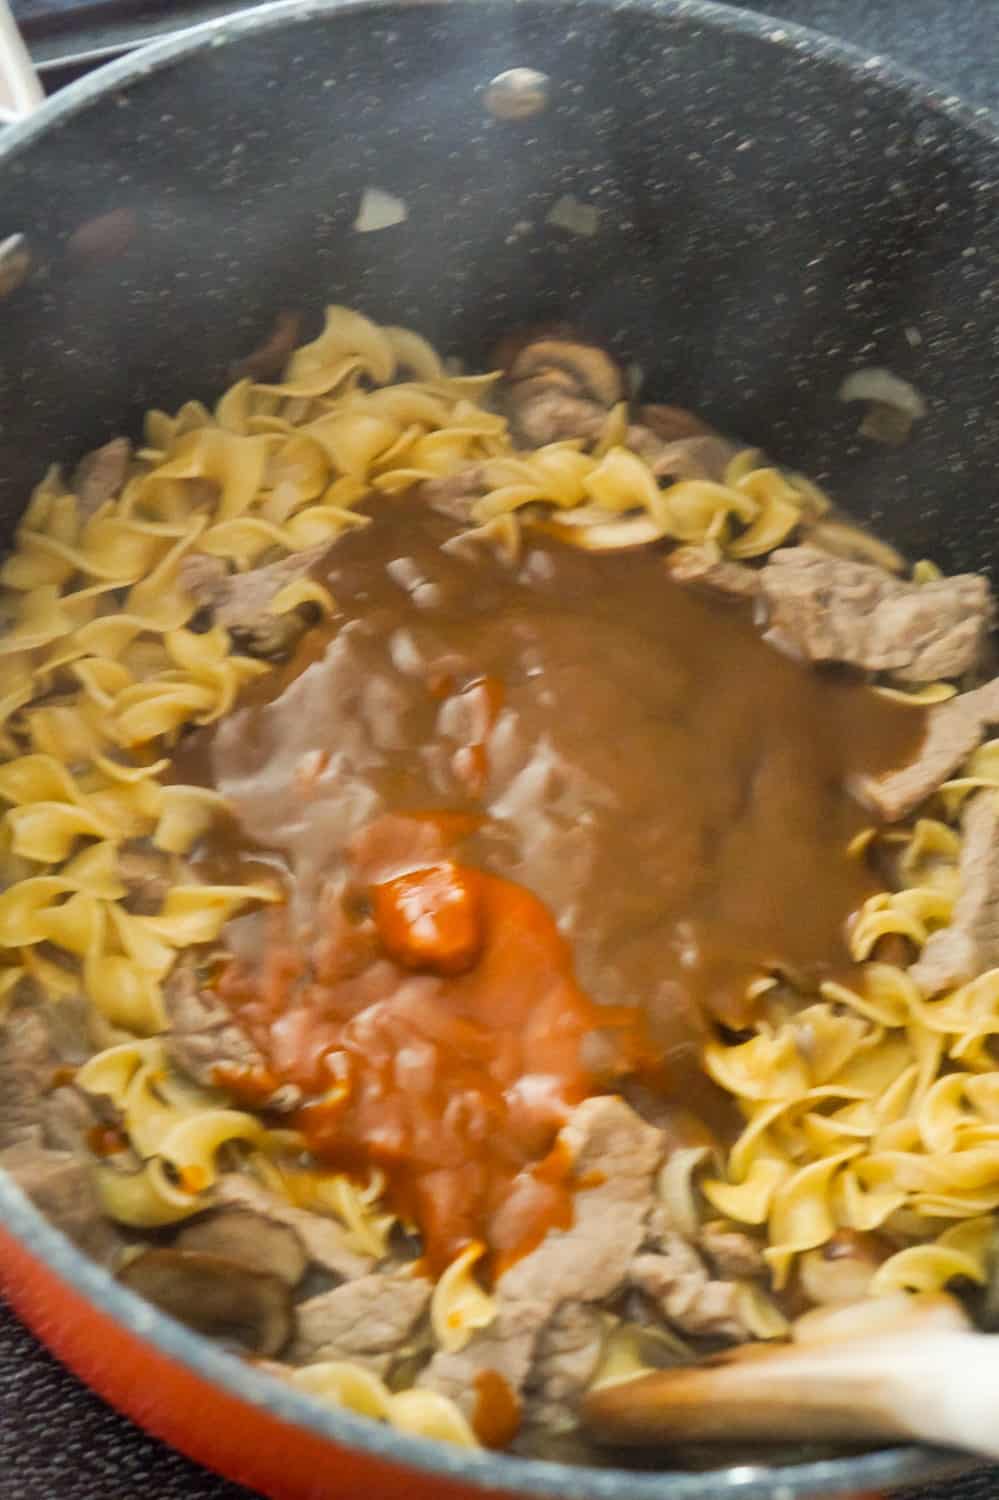 gravy and Heinz 57 sauce on top of egg noodles and steak pieces in a large pan